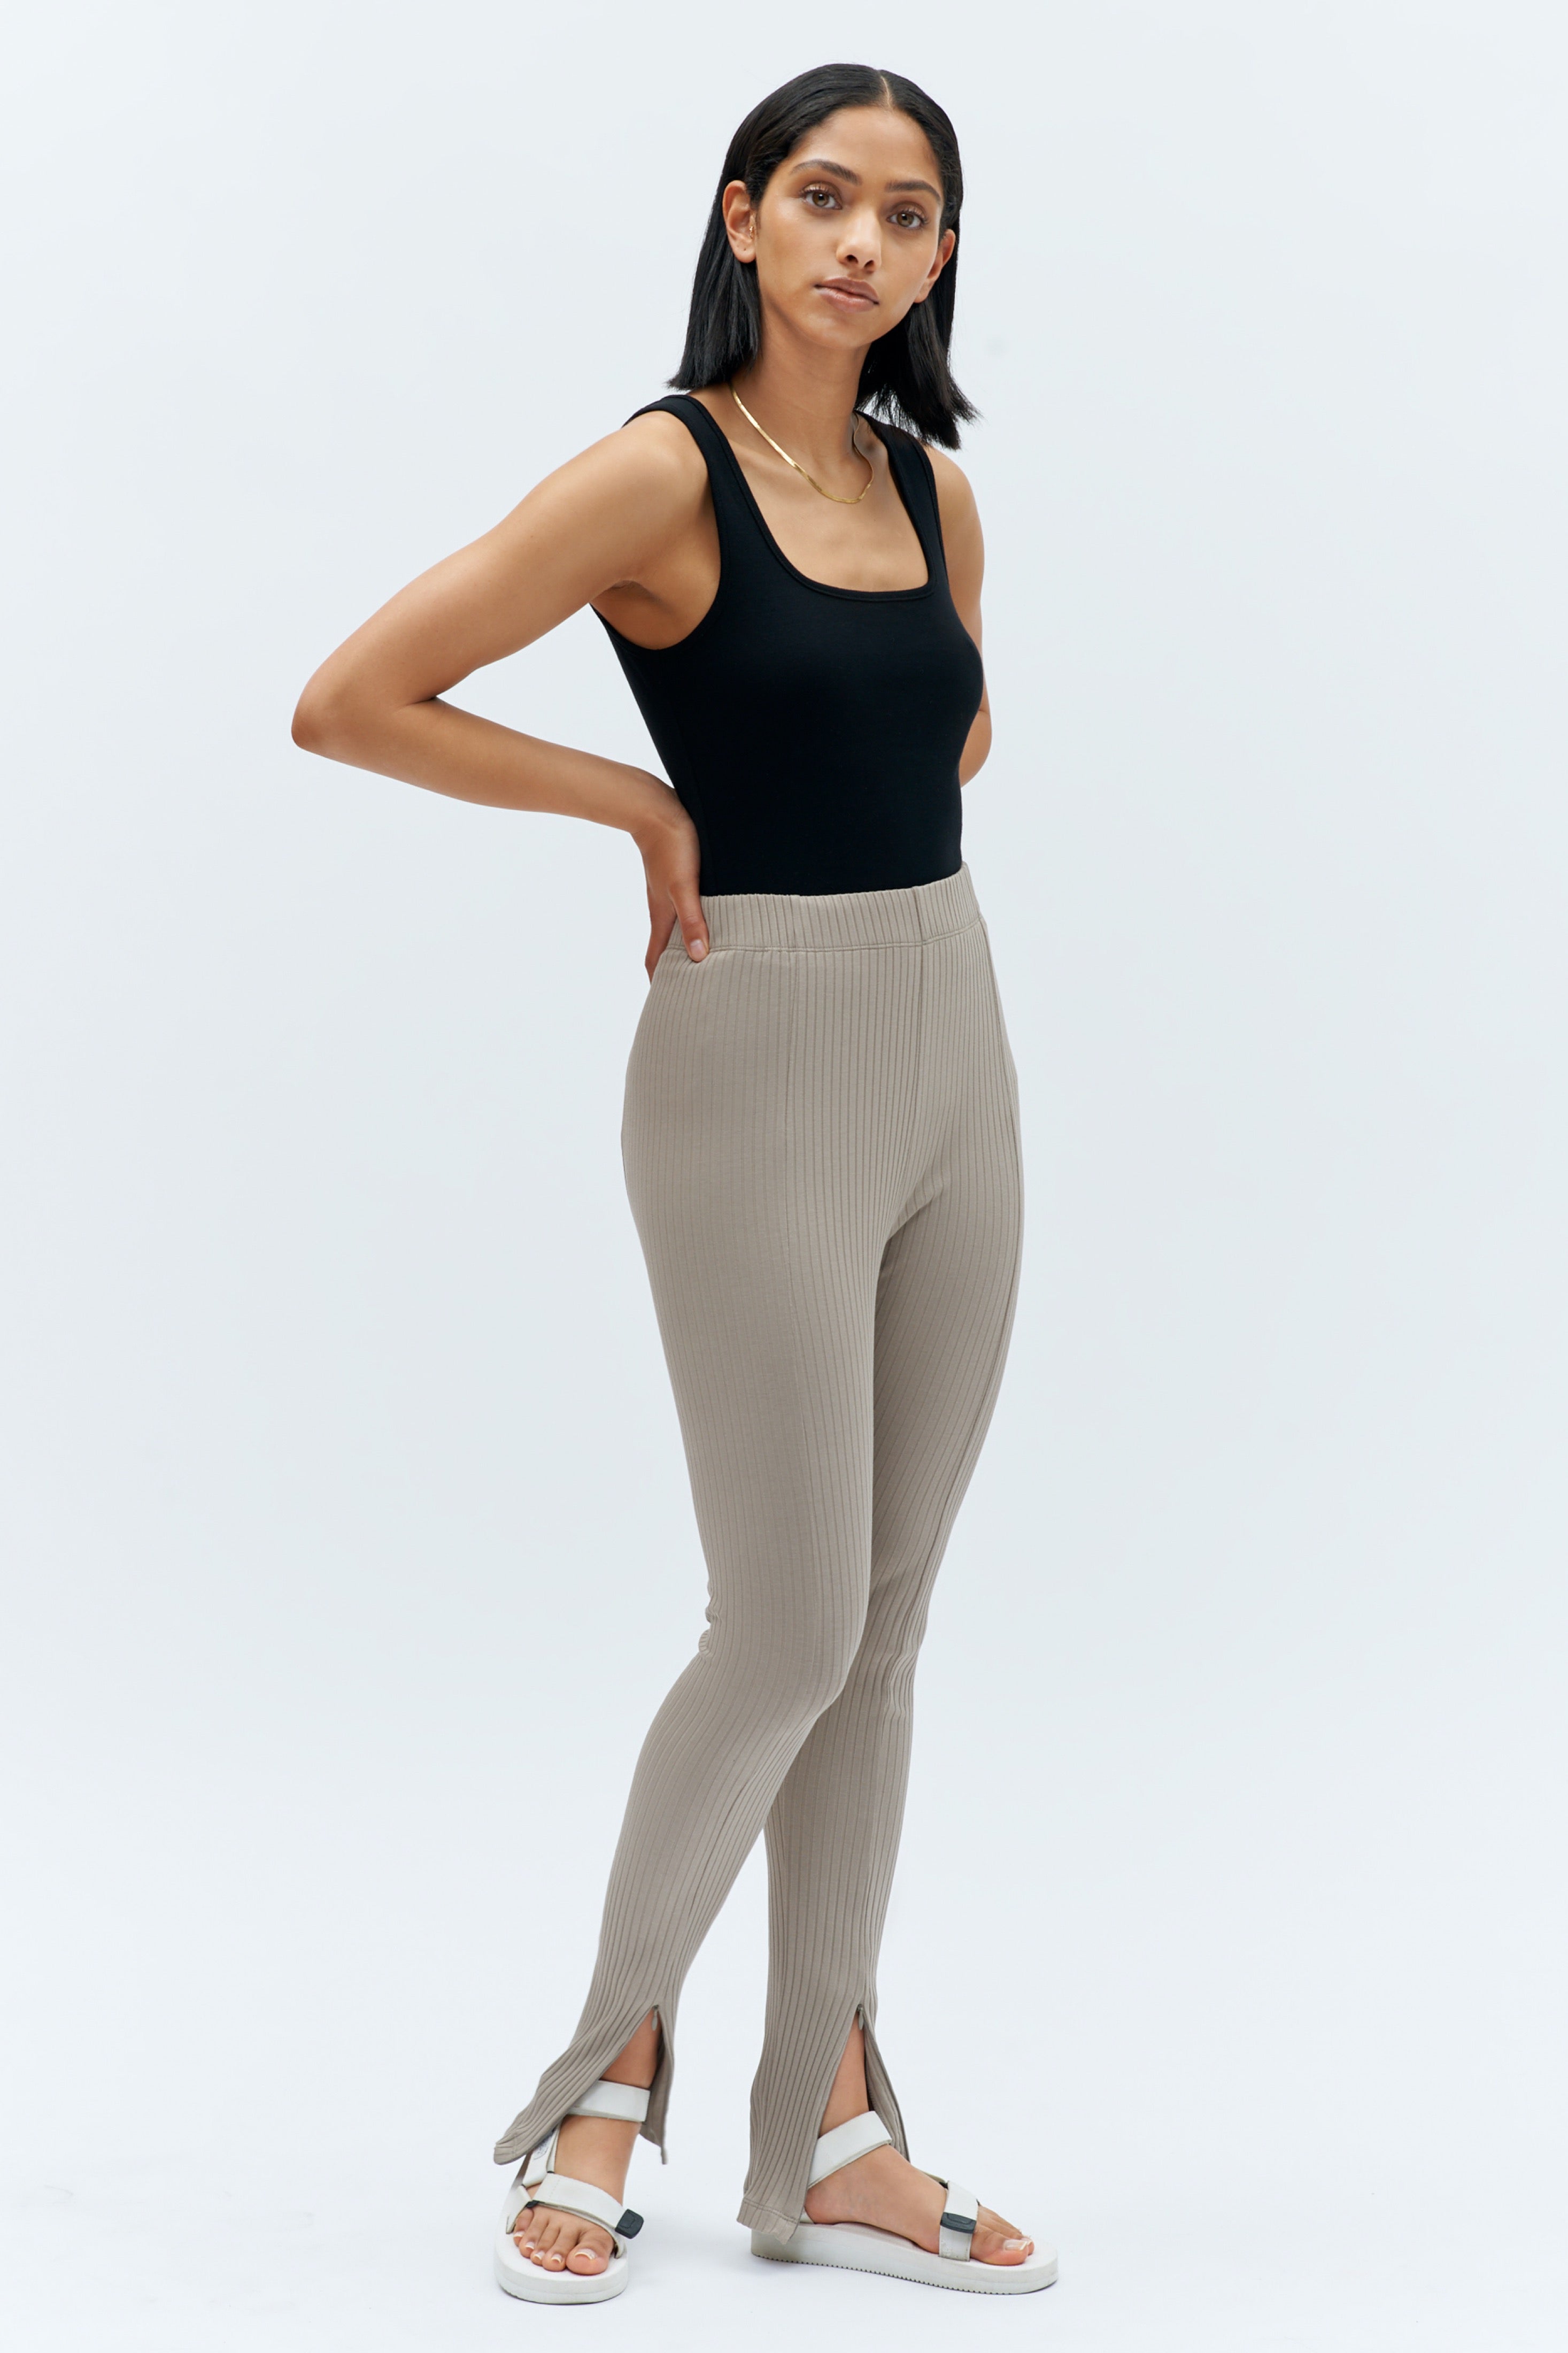  CUCUHAM Low Rise Leggings, Flared Sweatpants, Recent Orders, Cotton  Flare Leggings, Sales Today Clearance, Grey Leggings Flare, Pink Lounge  Set, Y2K Bottoms(X-Small,Aa-Black) : Clothing, Shoes & Jewelry